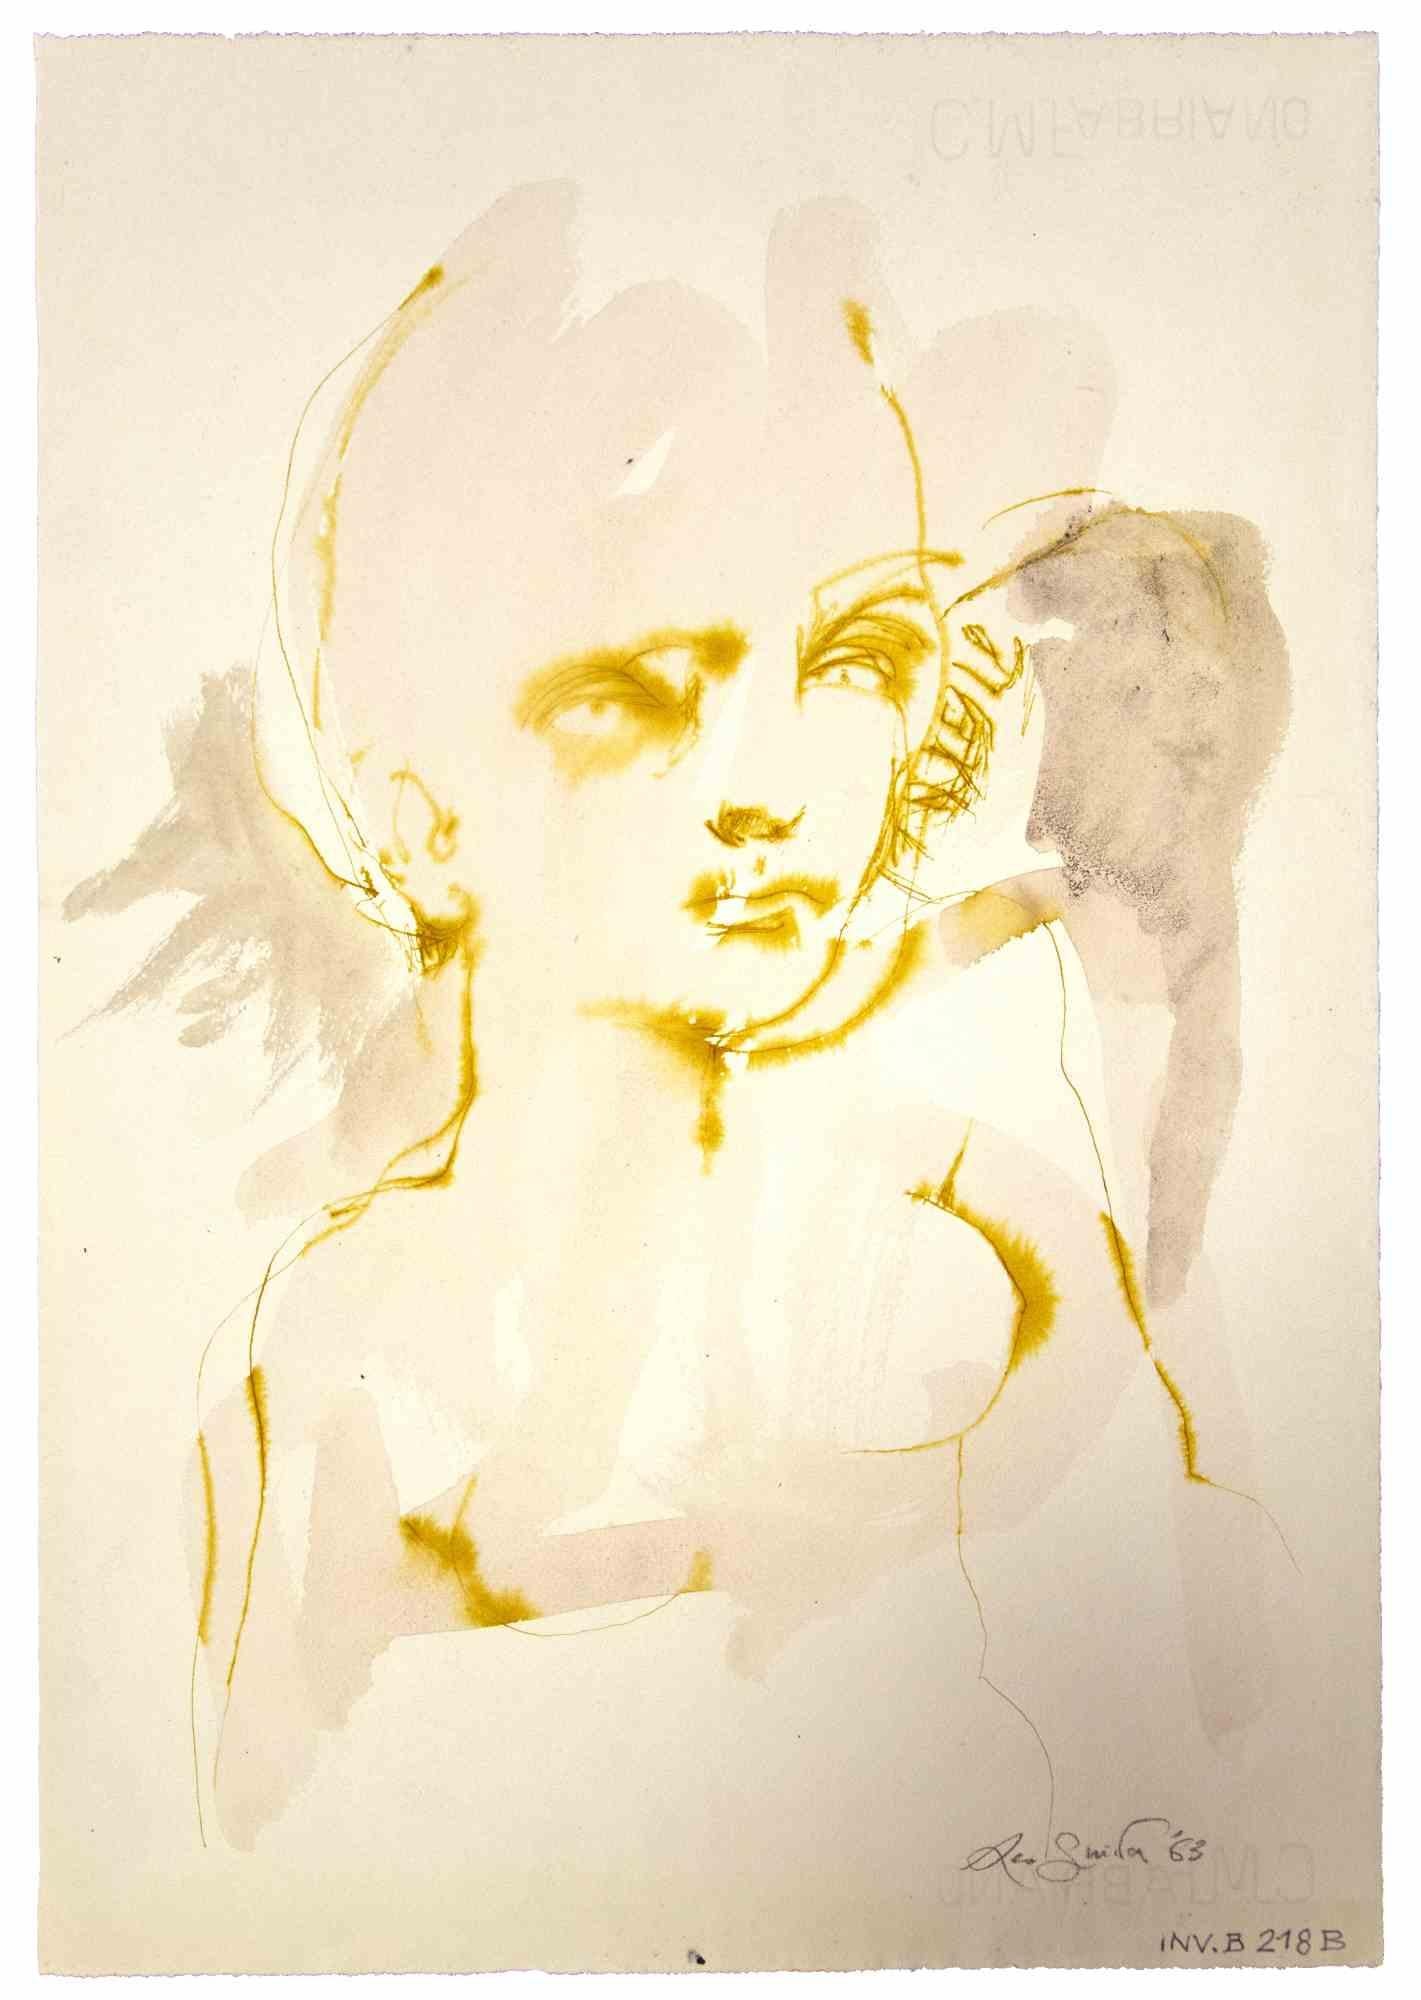 Portrait is an original Contemporary artwork realized  in 1963  by the italian Contemporary artist  Leo Guida  (1992 - 2017).

Original ink and watercolor drawing on ivory-colored paper.

Hand-signed and dated on the lower margin. Cat. INV.B